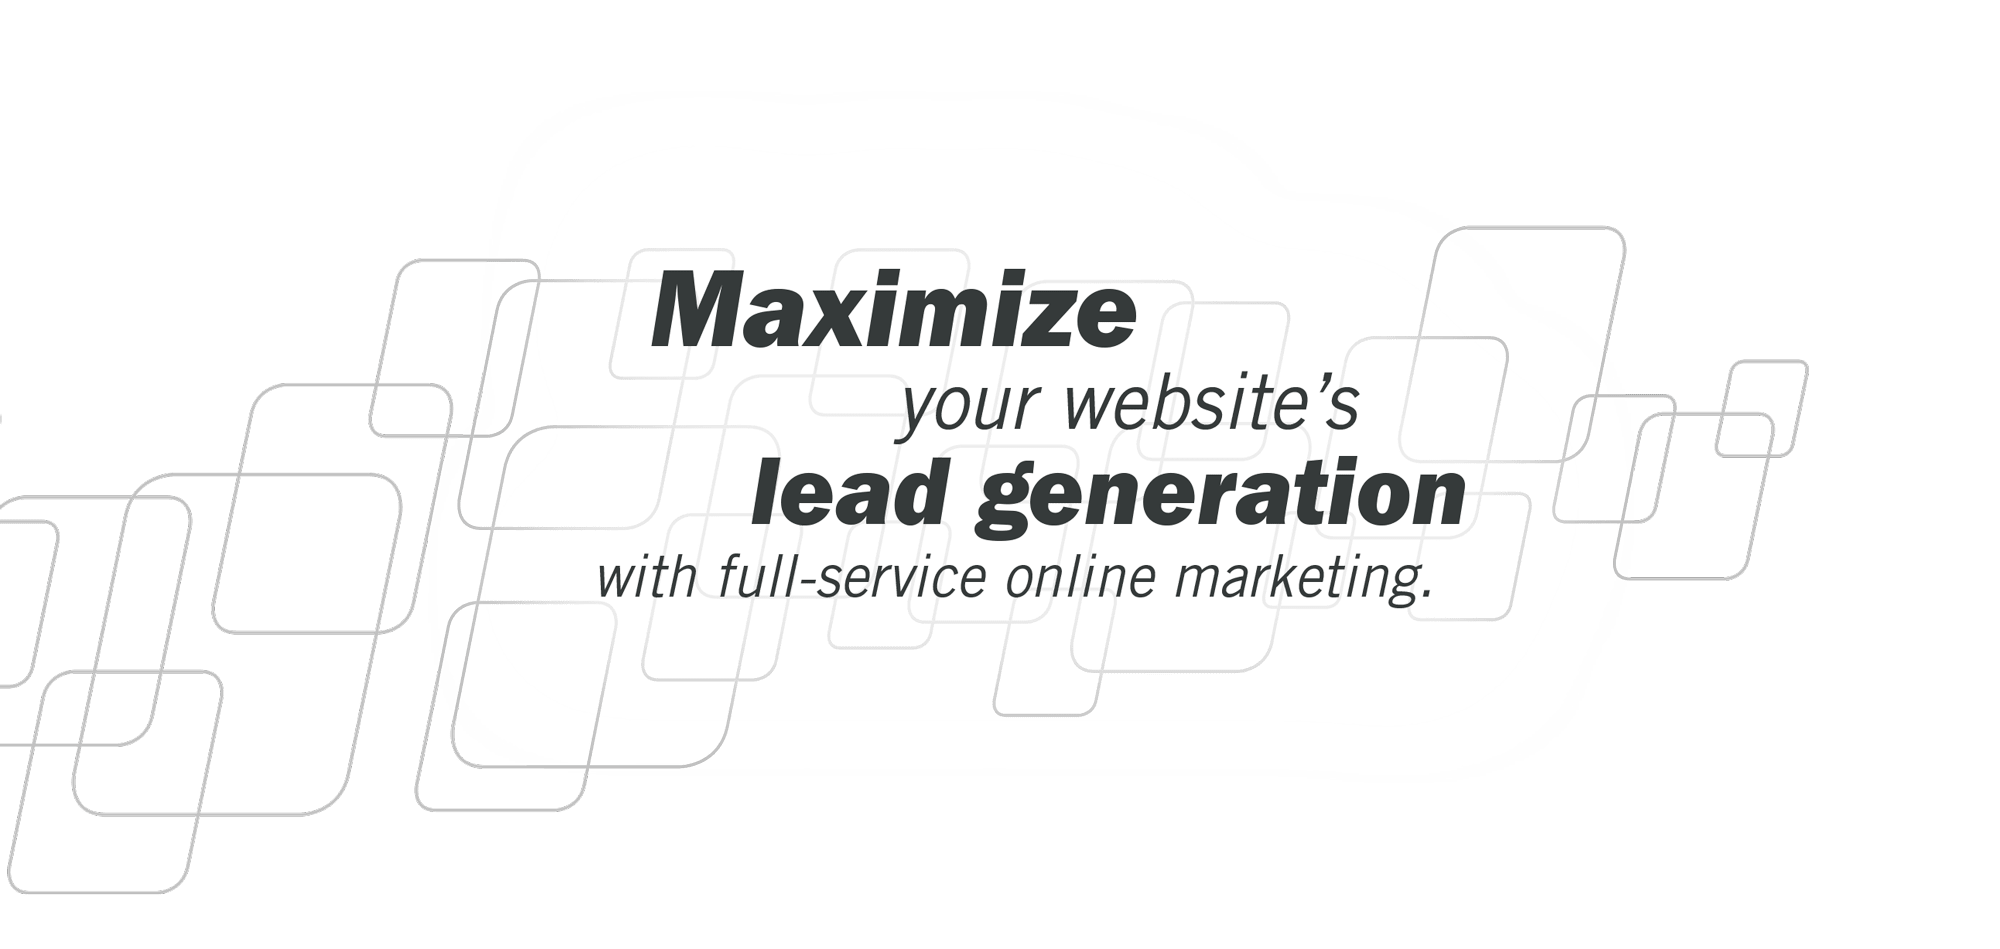 Maximize your website's lead generation with full-service online marketing